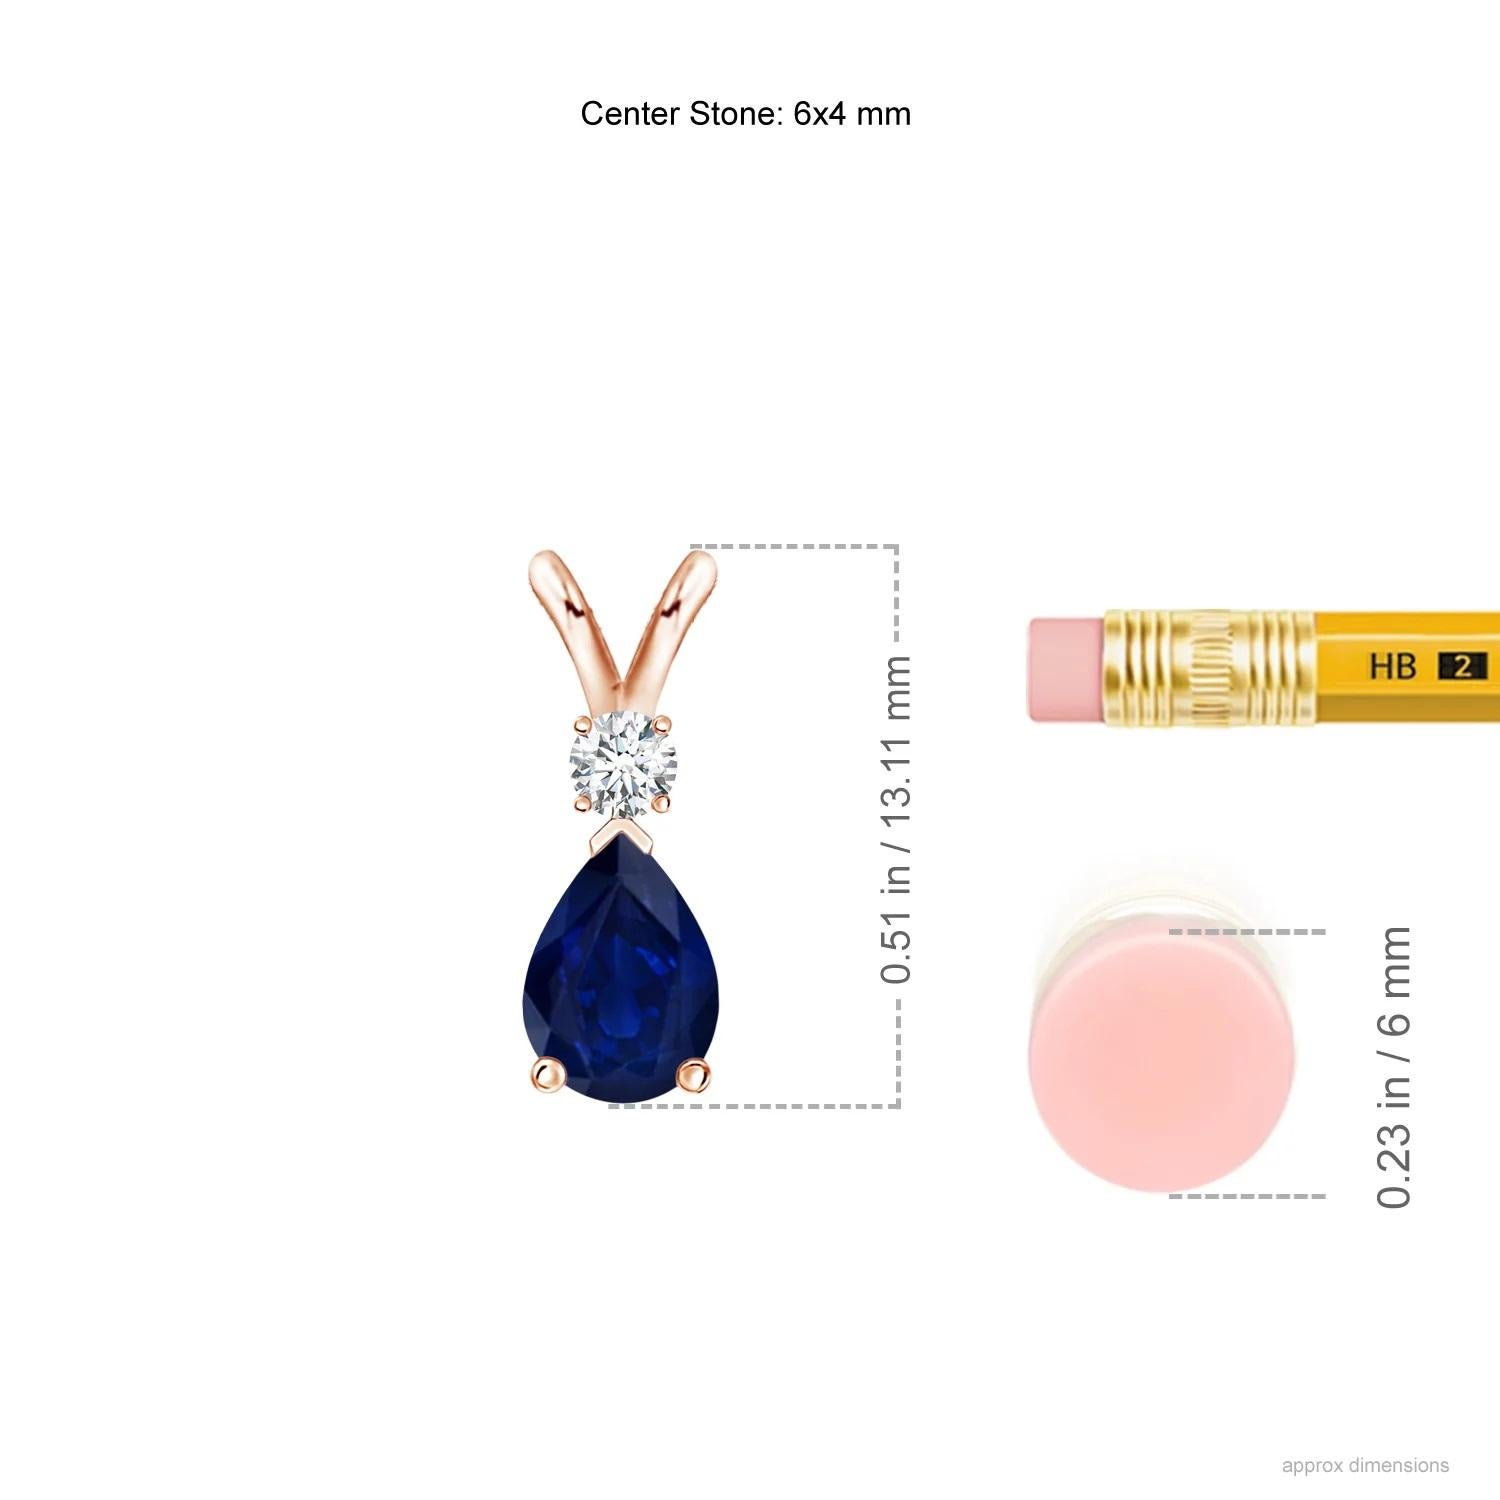 This classic solitaire pendant features a pear-shaped sapphire secured in a prong setting. A brilliant round diamond sits atop the blue gemstone adding to the design's charm. Simple yet appealing, this sapphire pendant in 14k rose gold is crafted